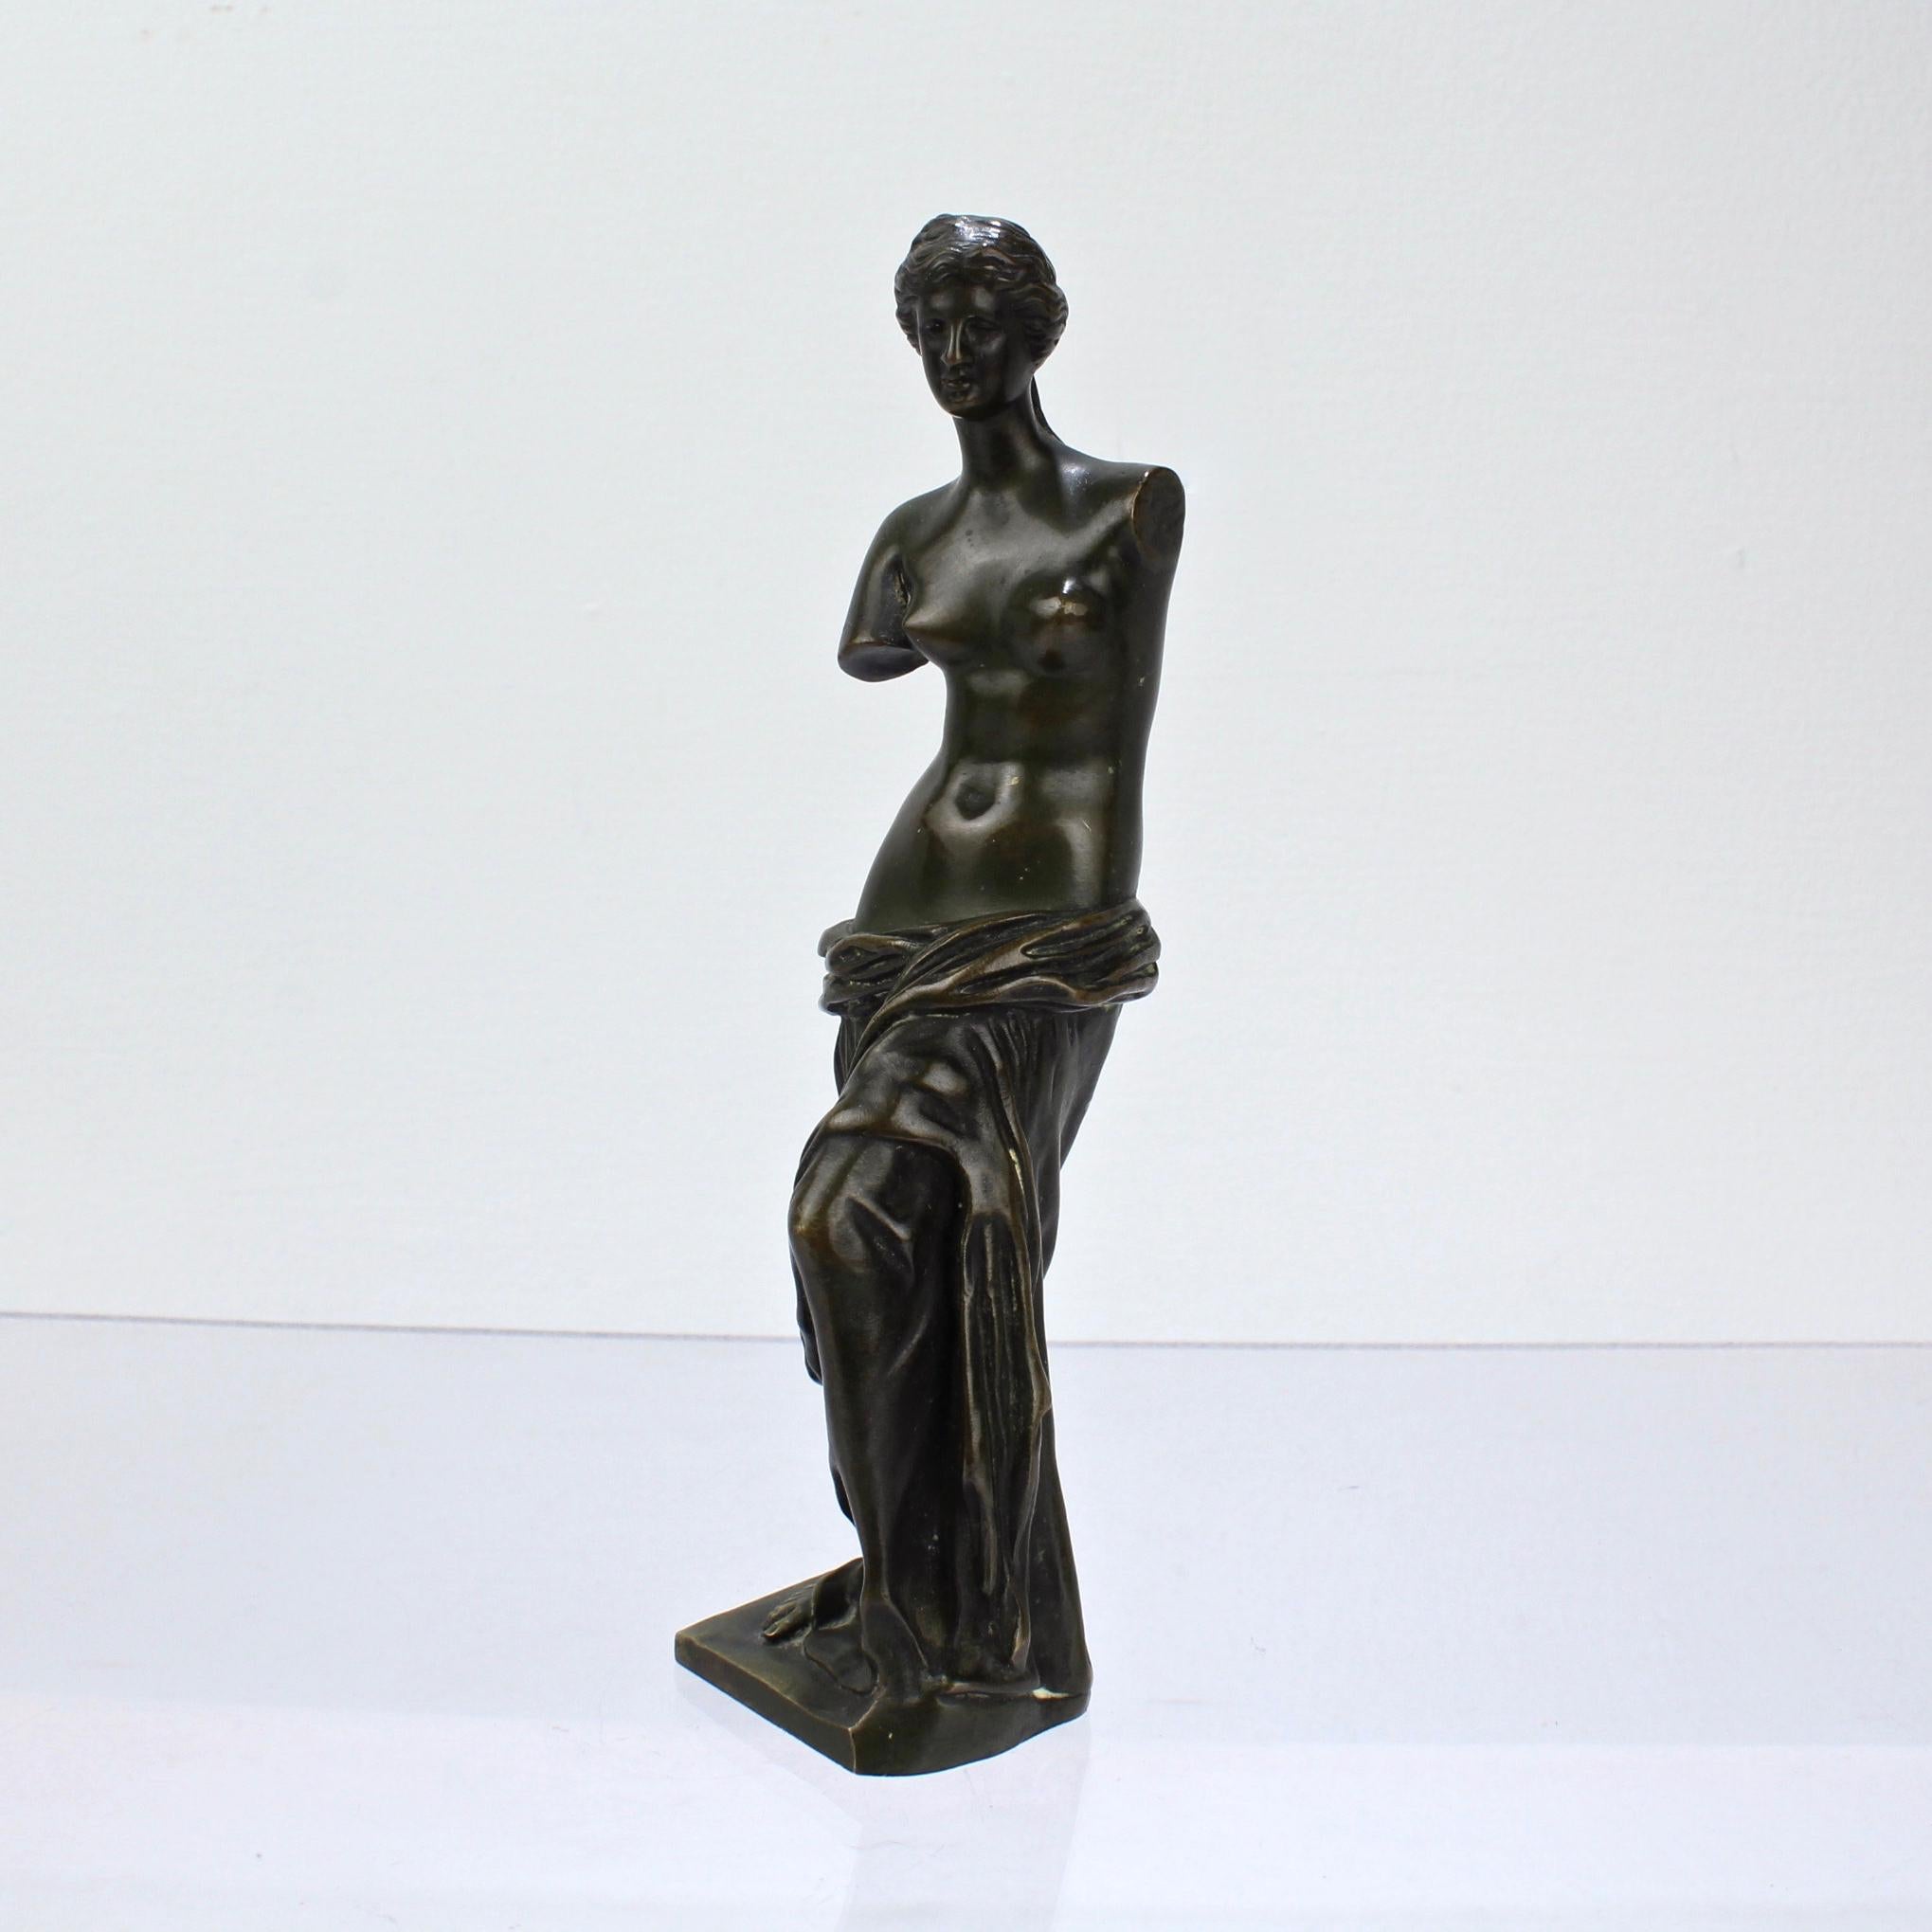 A fine Venus de Milo bronze after Sauvage.

In an diminutive size that is perfect for the desk, mantel or vitrine. 

Simply a wonderful little bronze in the Grand Tour or Kunstkammer traditions of objet.

Measures: Height: ca. 6 3/8